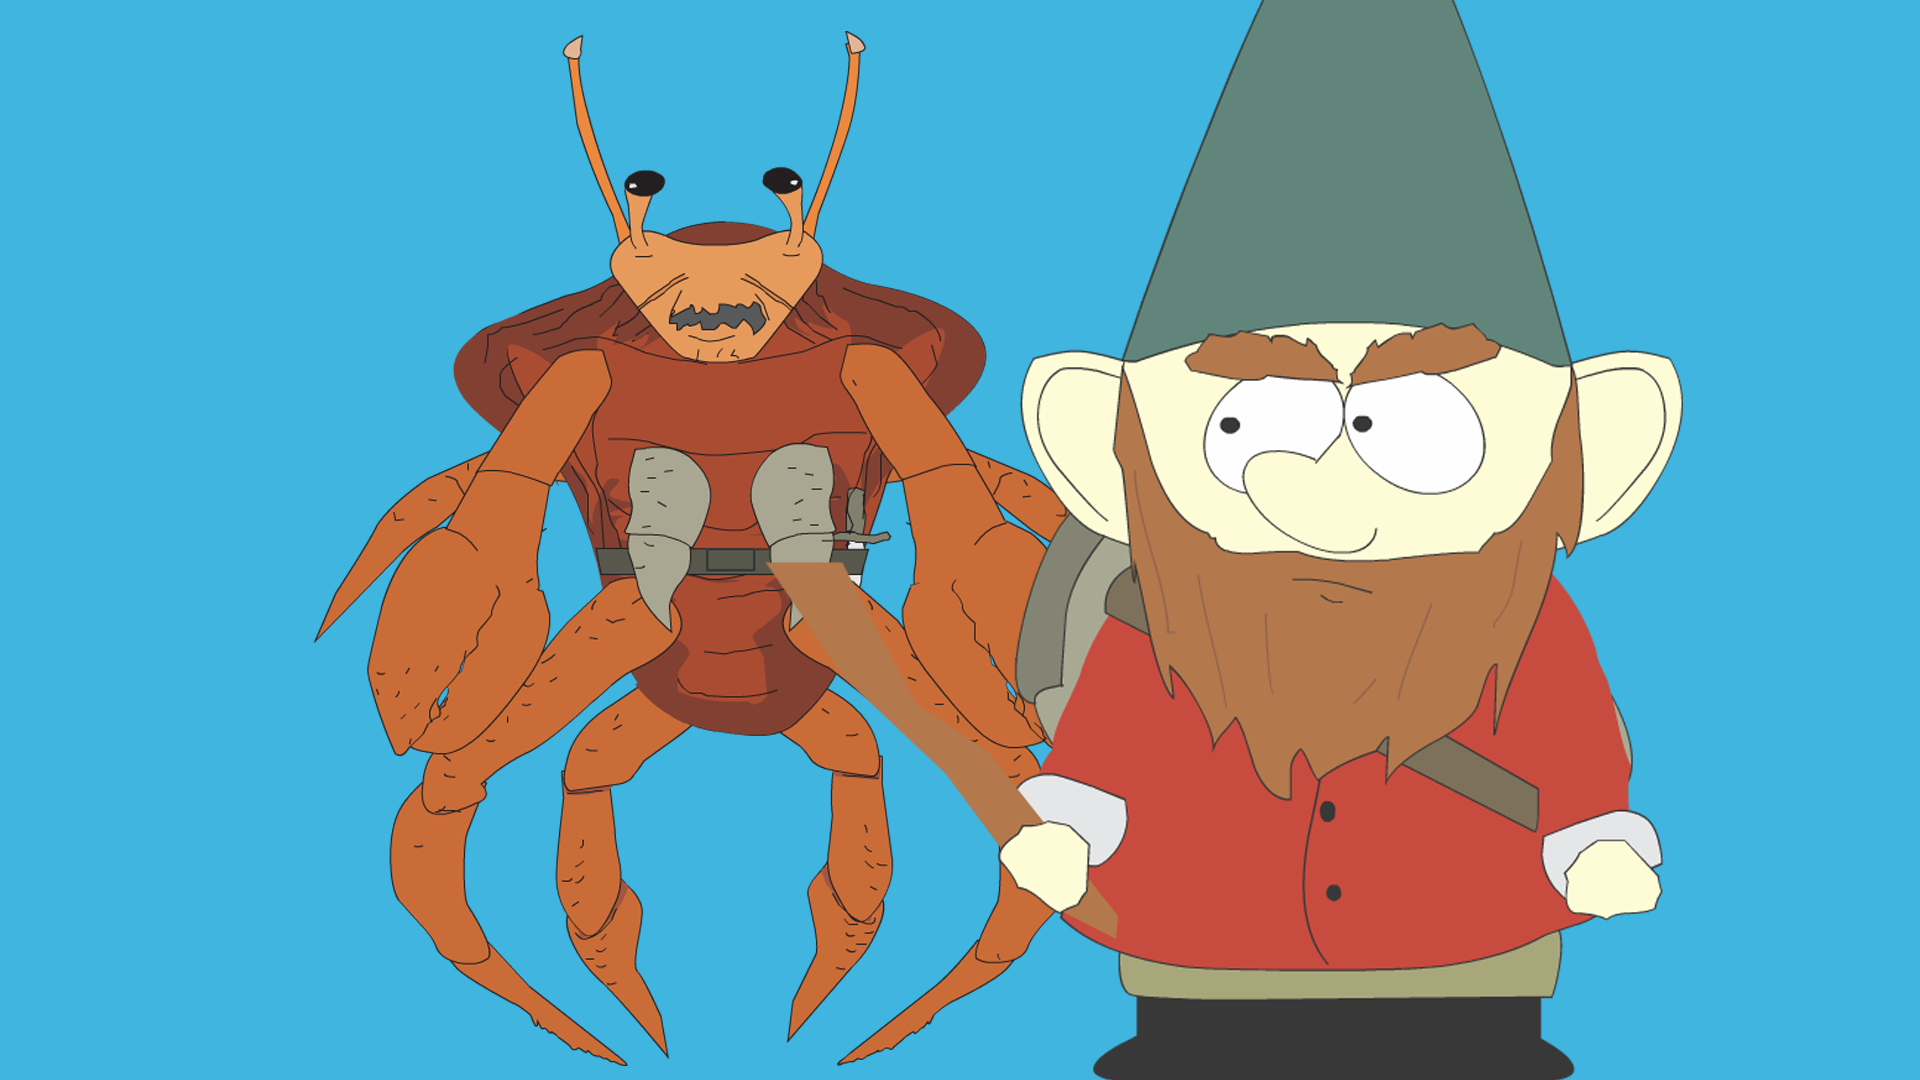 You befriended both crab people and gnomes. 